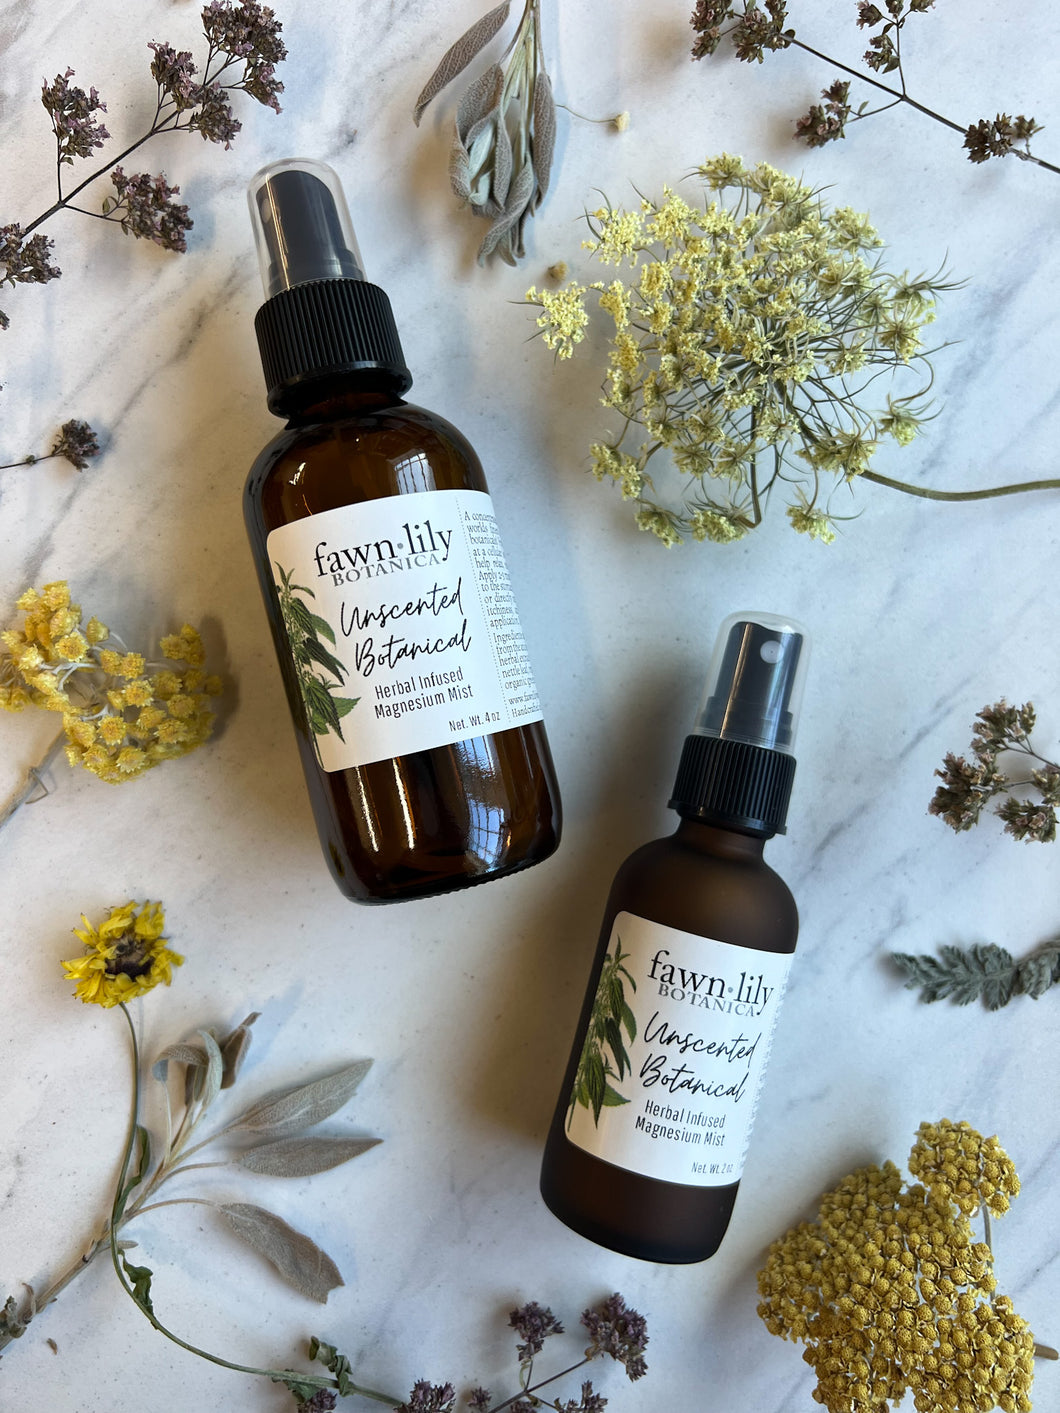 Unscented Botanical Magnesium Mist | Fawn Lily Botanica - botanical infused magnesium oil, pure and concentrated natural herbal formulas